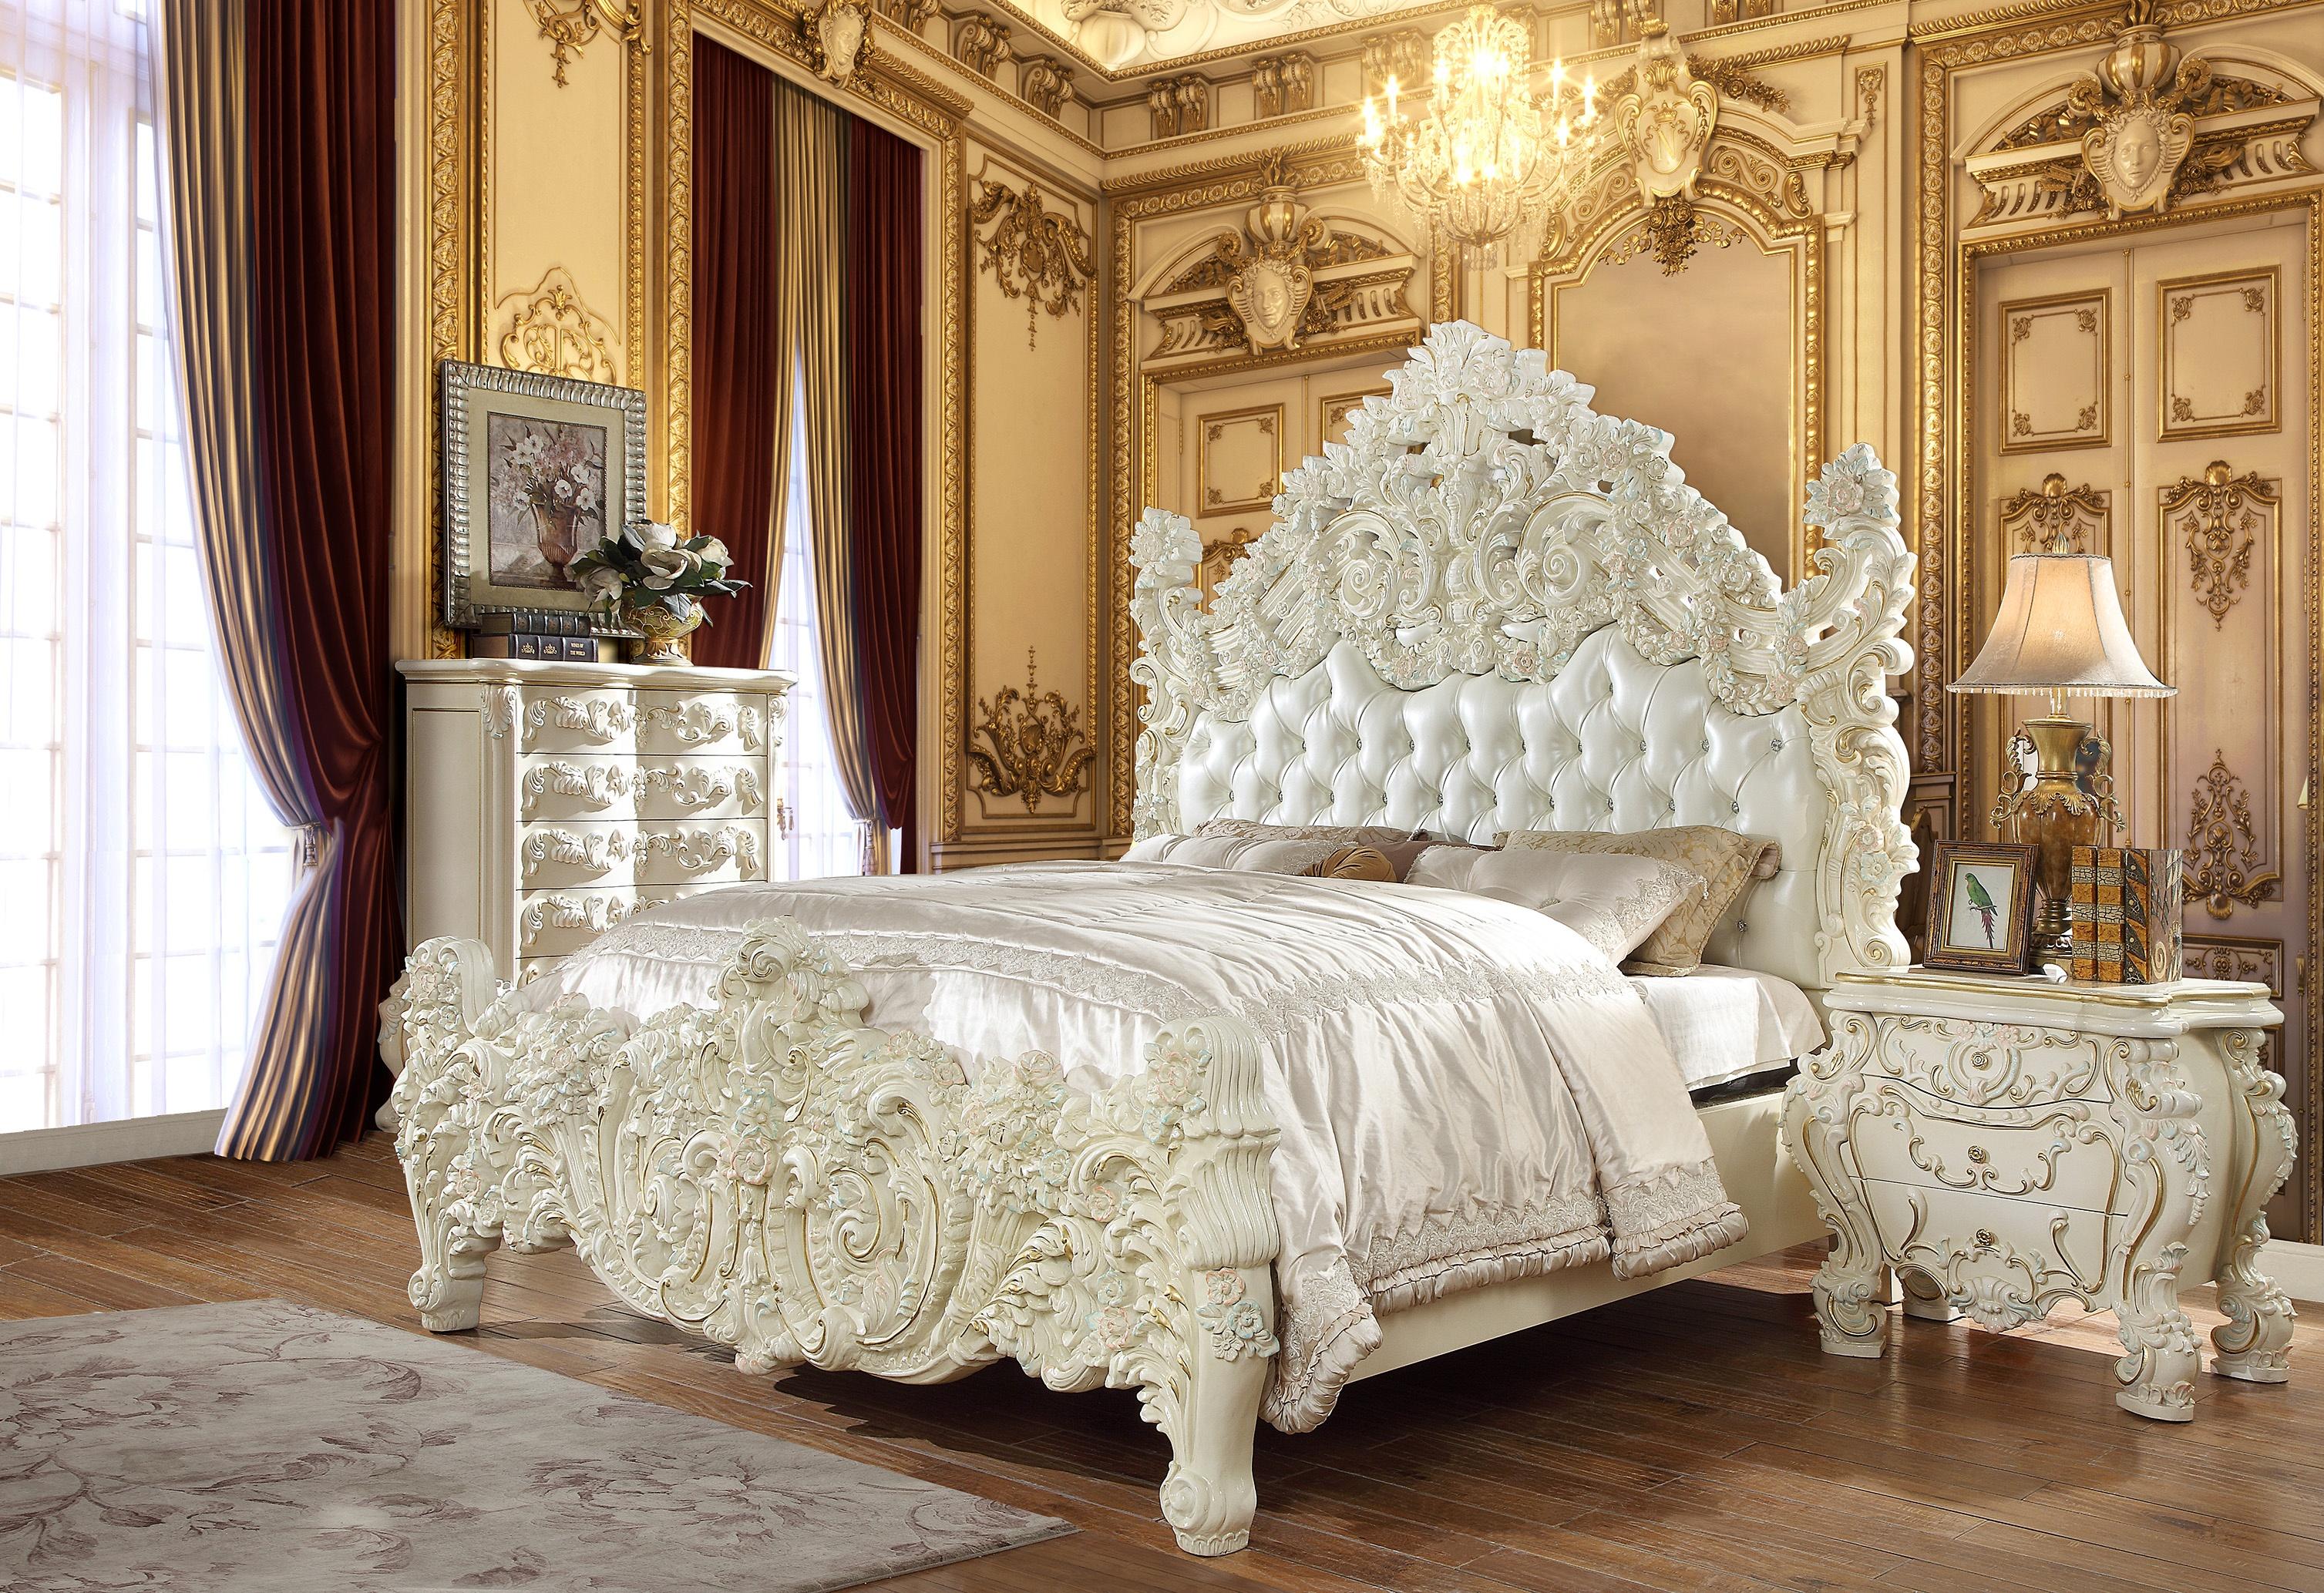 

    
Luxury Glossy White King Bedroom Set 5Pcs Carved Wood Homey Design HD-8089
